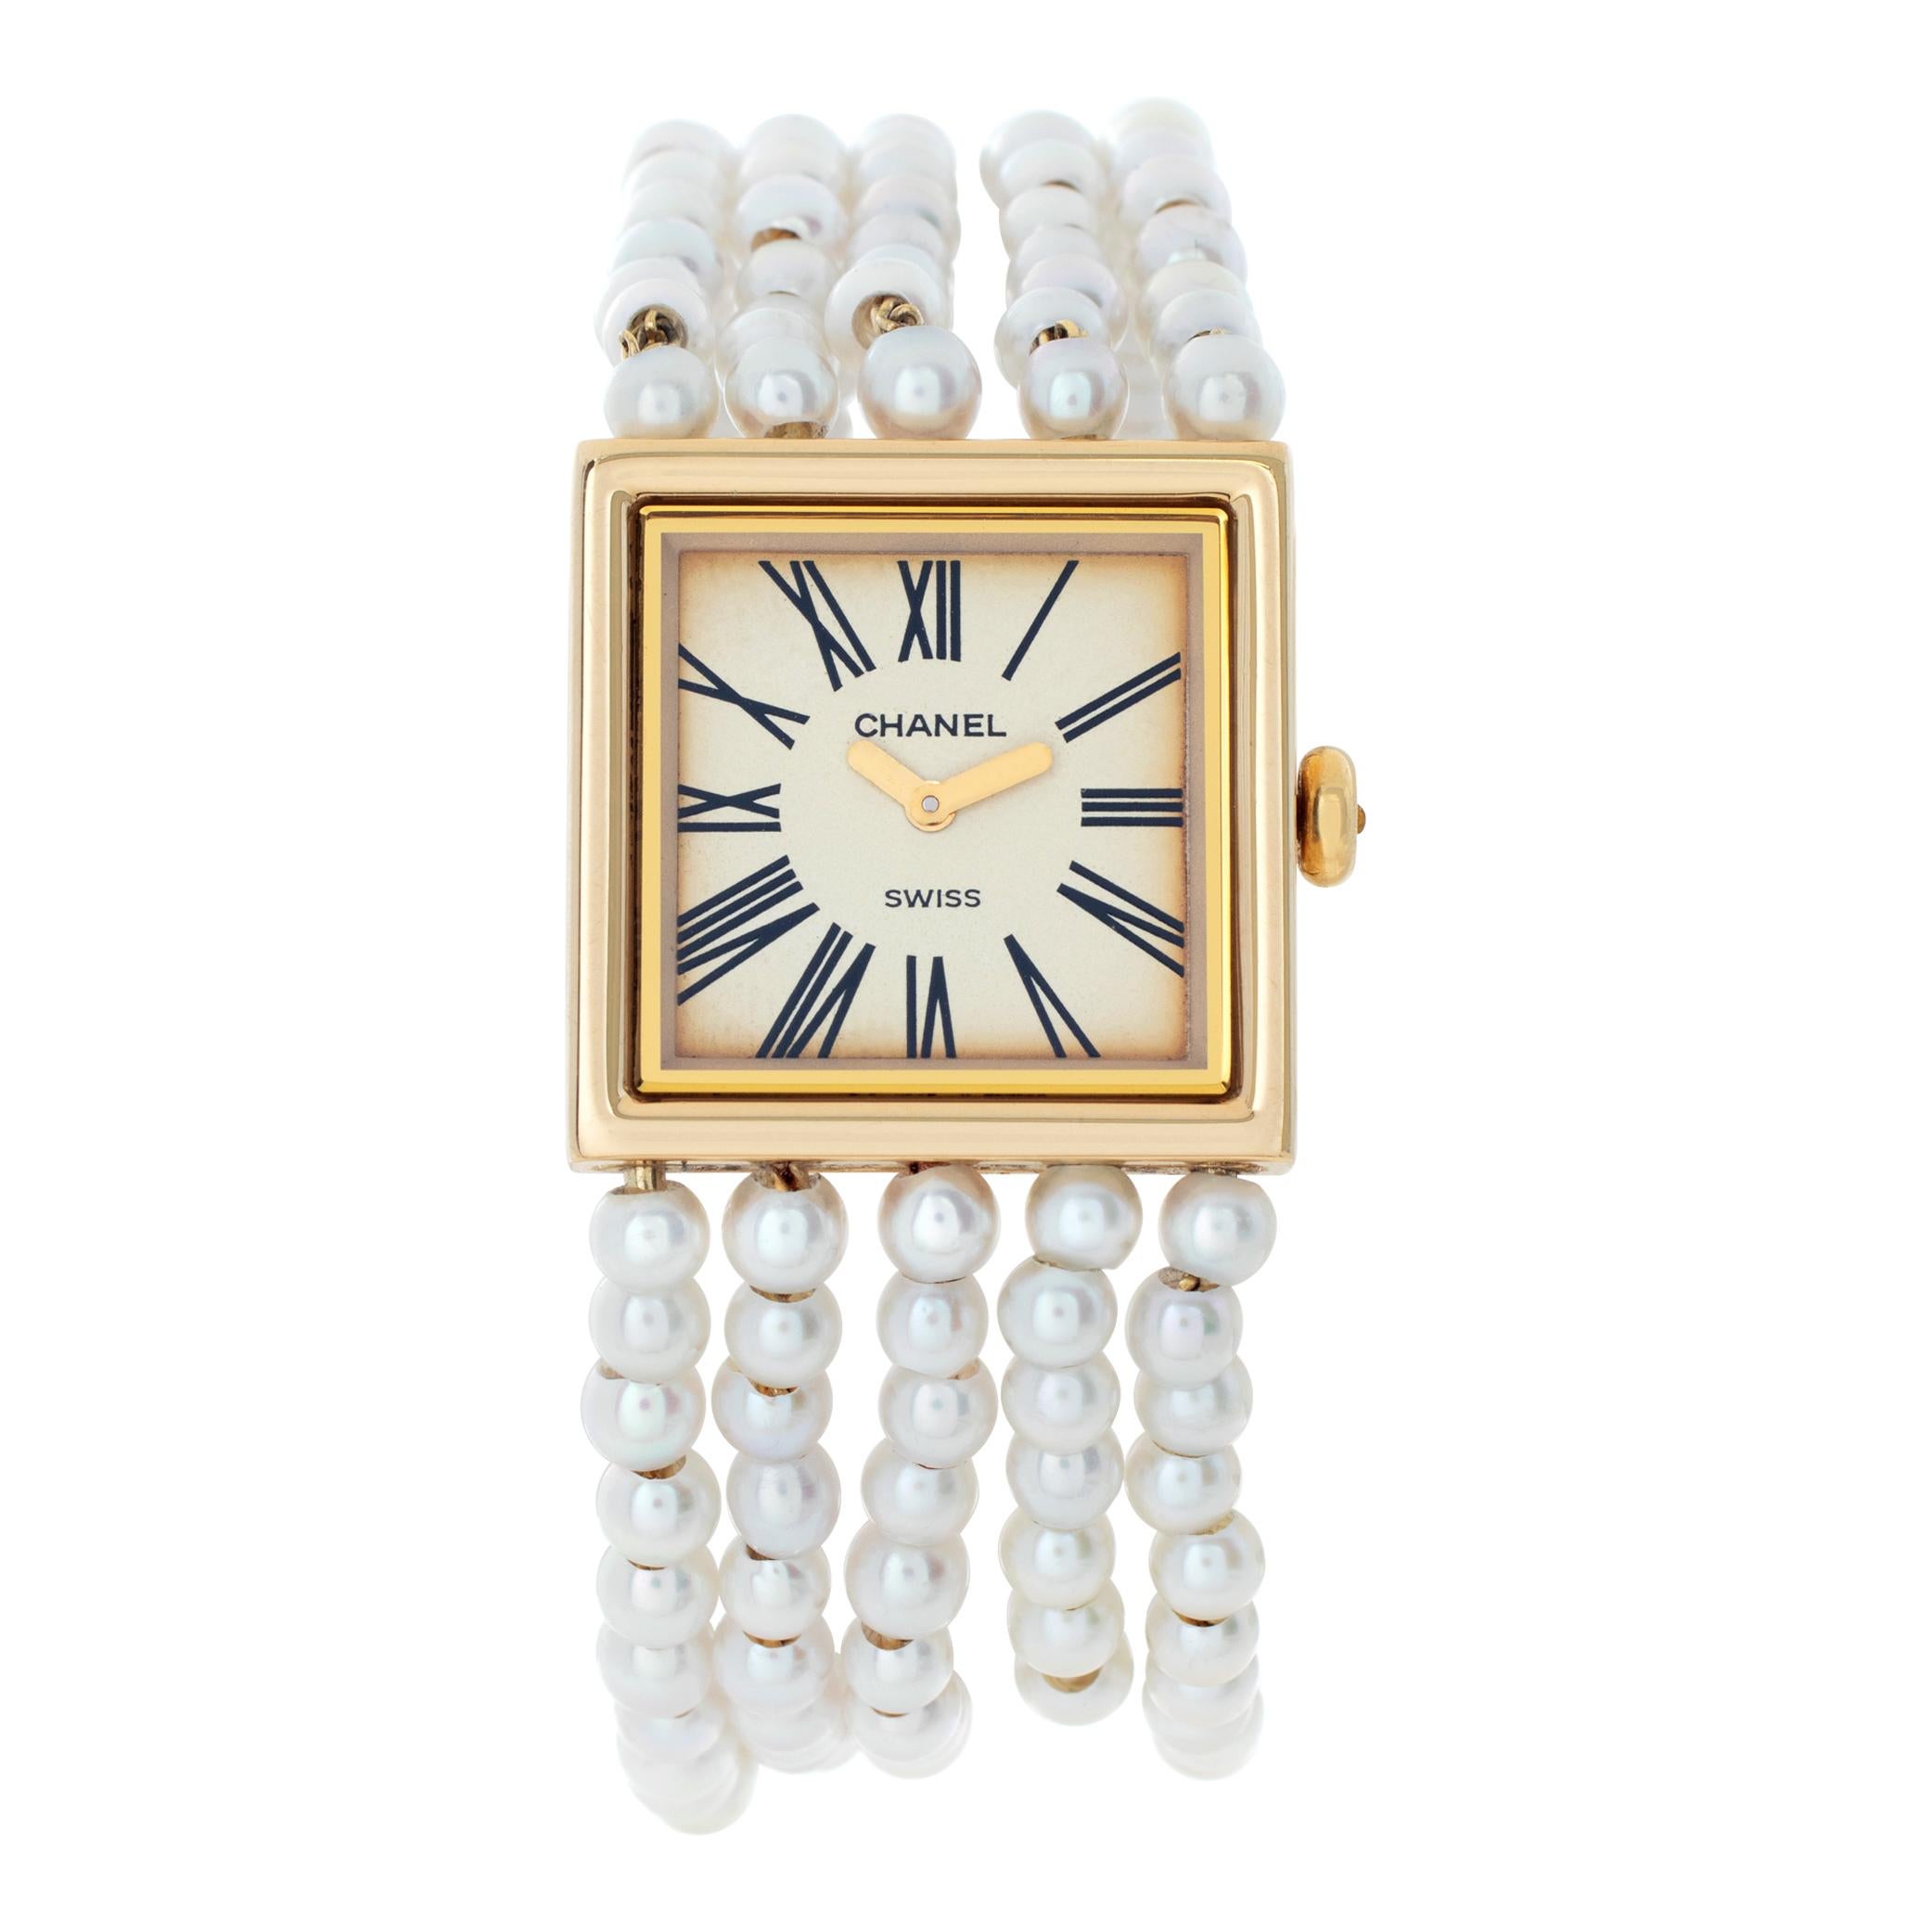 Chanel Mademoiselle h0007 18k yellow gold watch In Good Condition For Sale In Surfside, FL